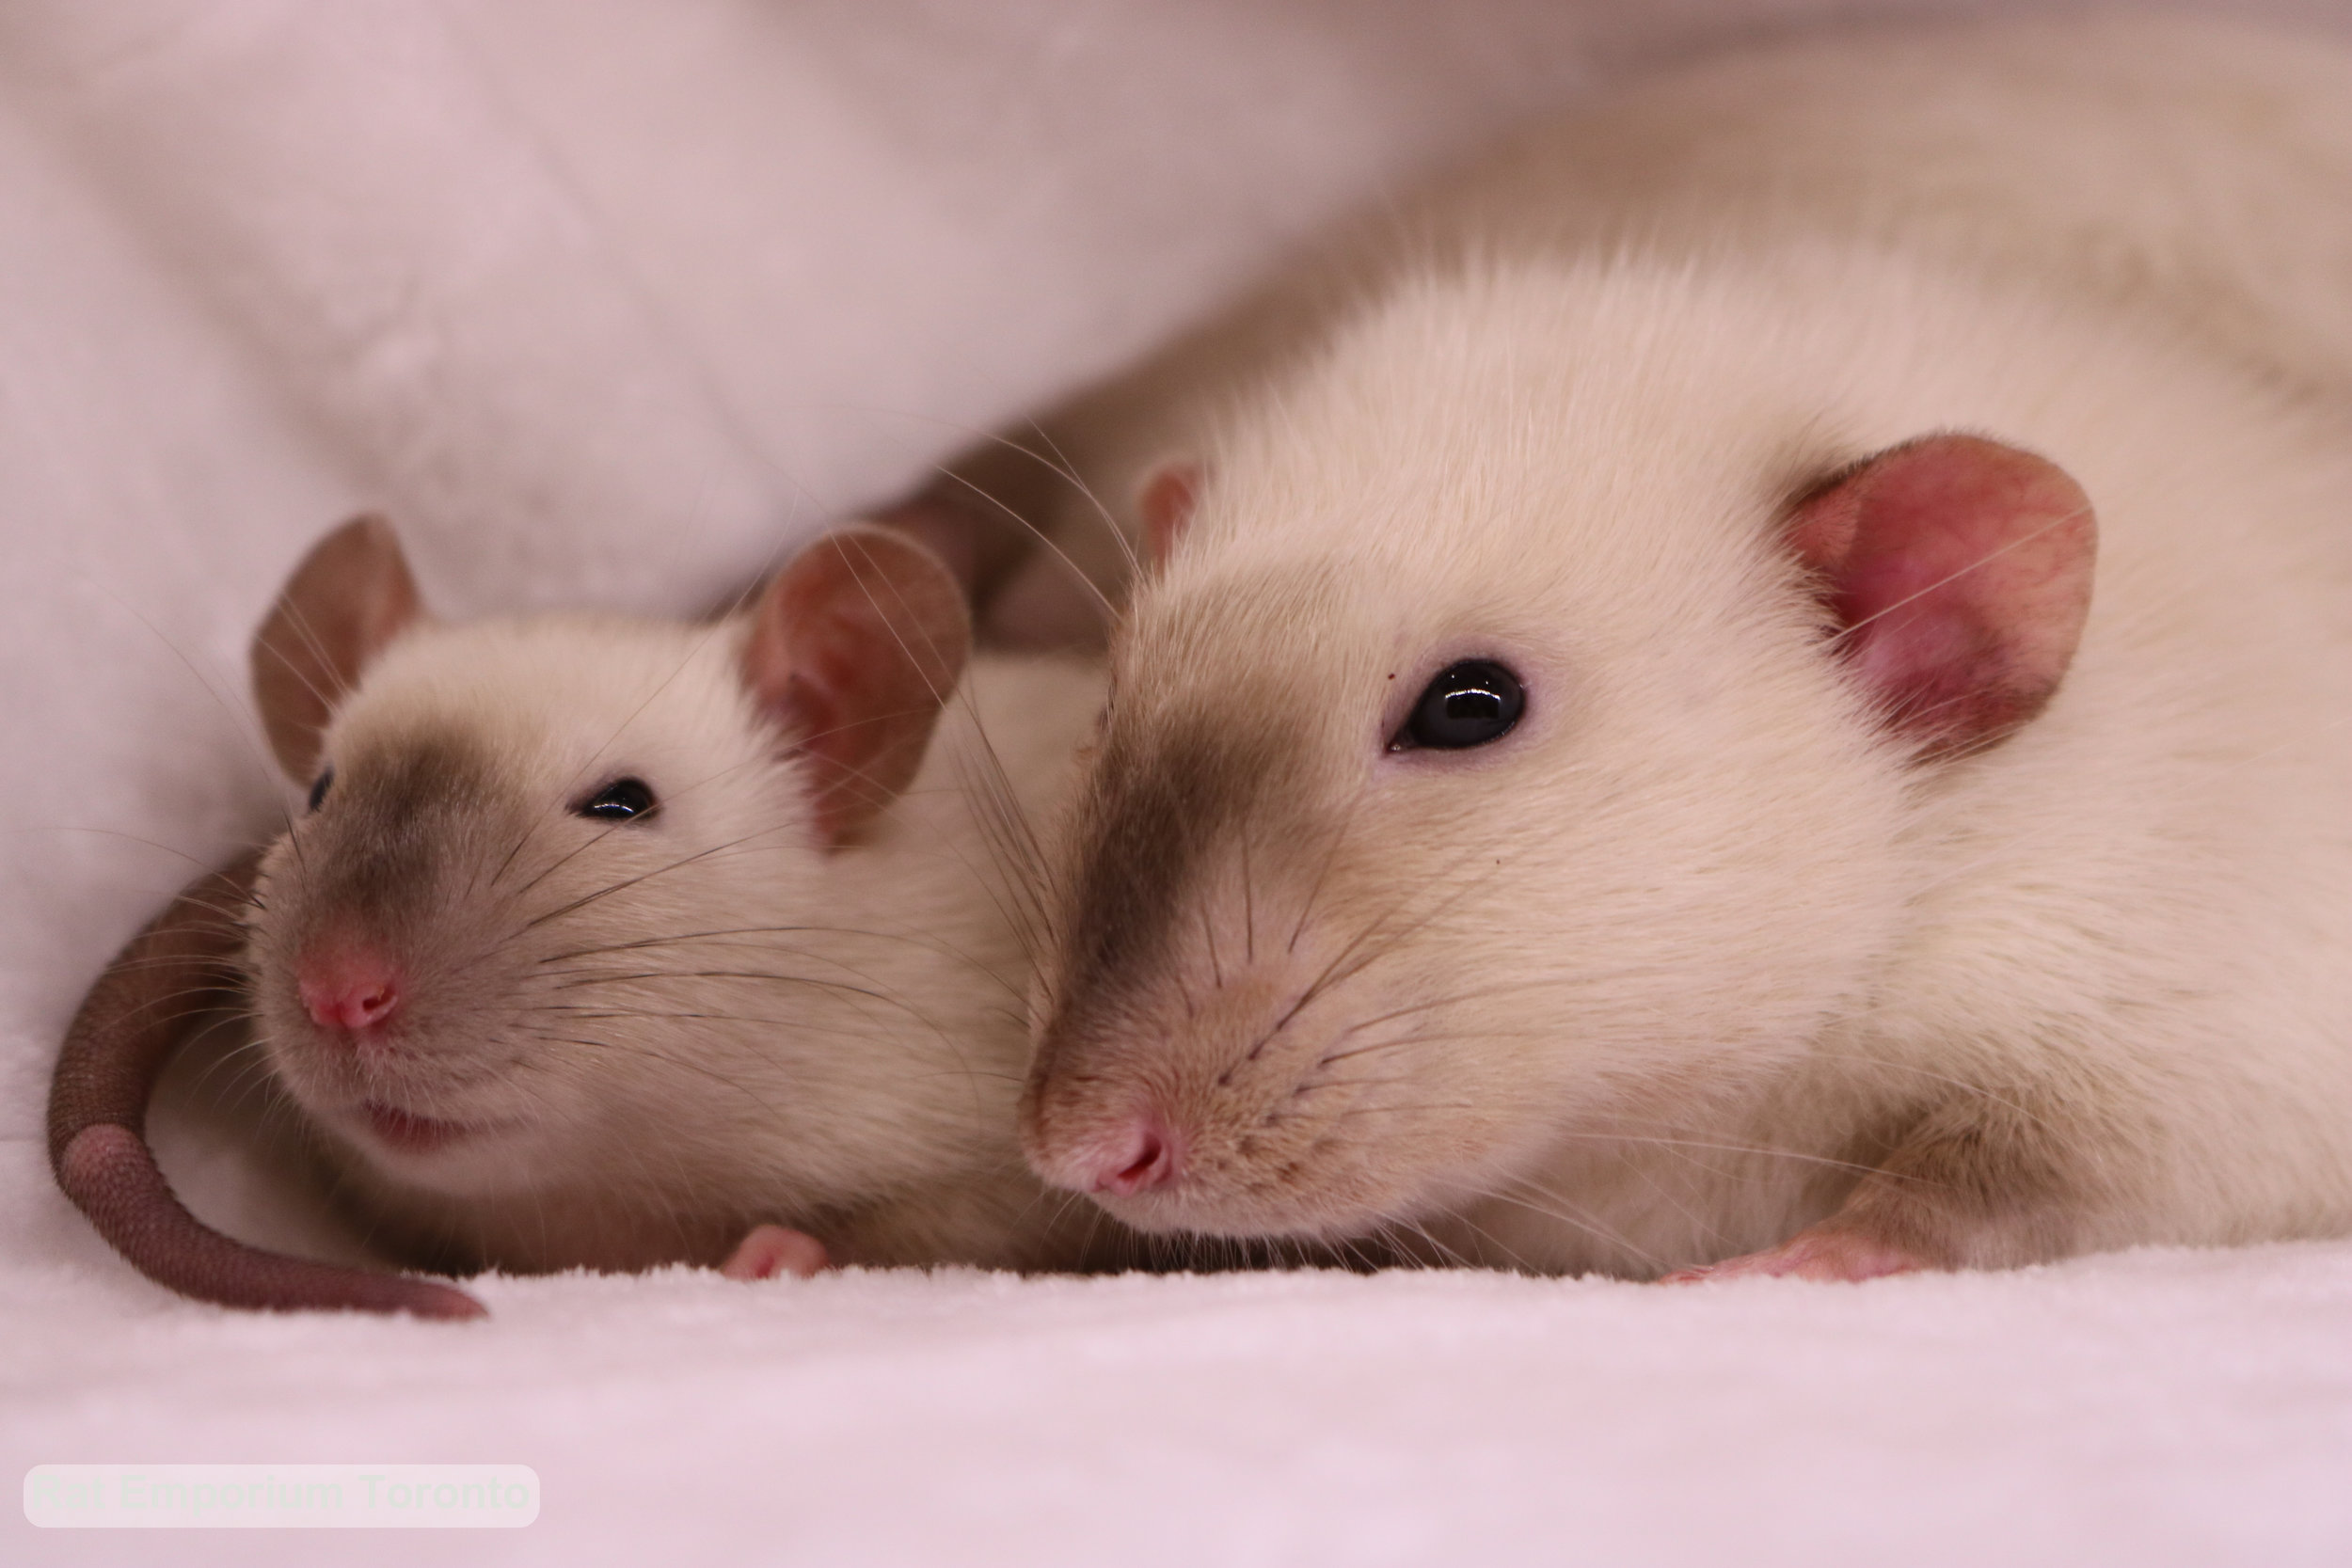 Siamese dumbo rat and top eared siamese rat - born and raised at the Rat Emporium Toronto - rat breeder Toronto - adopt pet rats - learn about rats